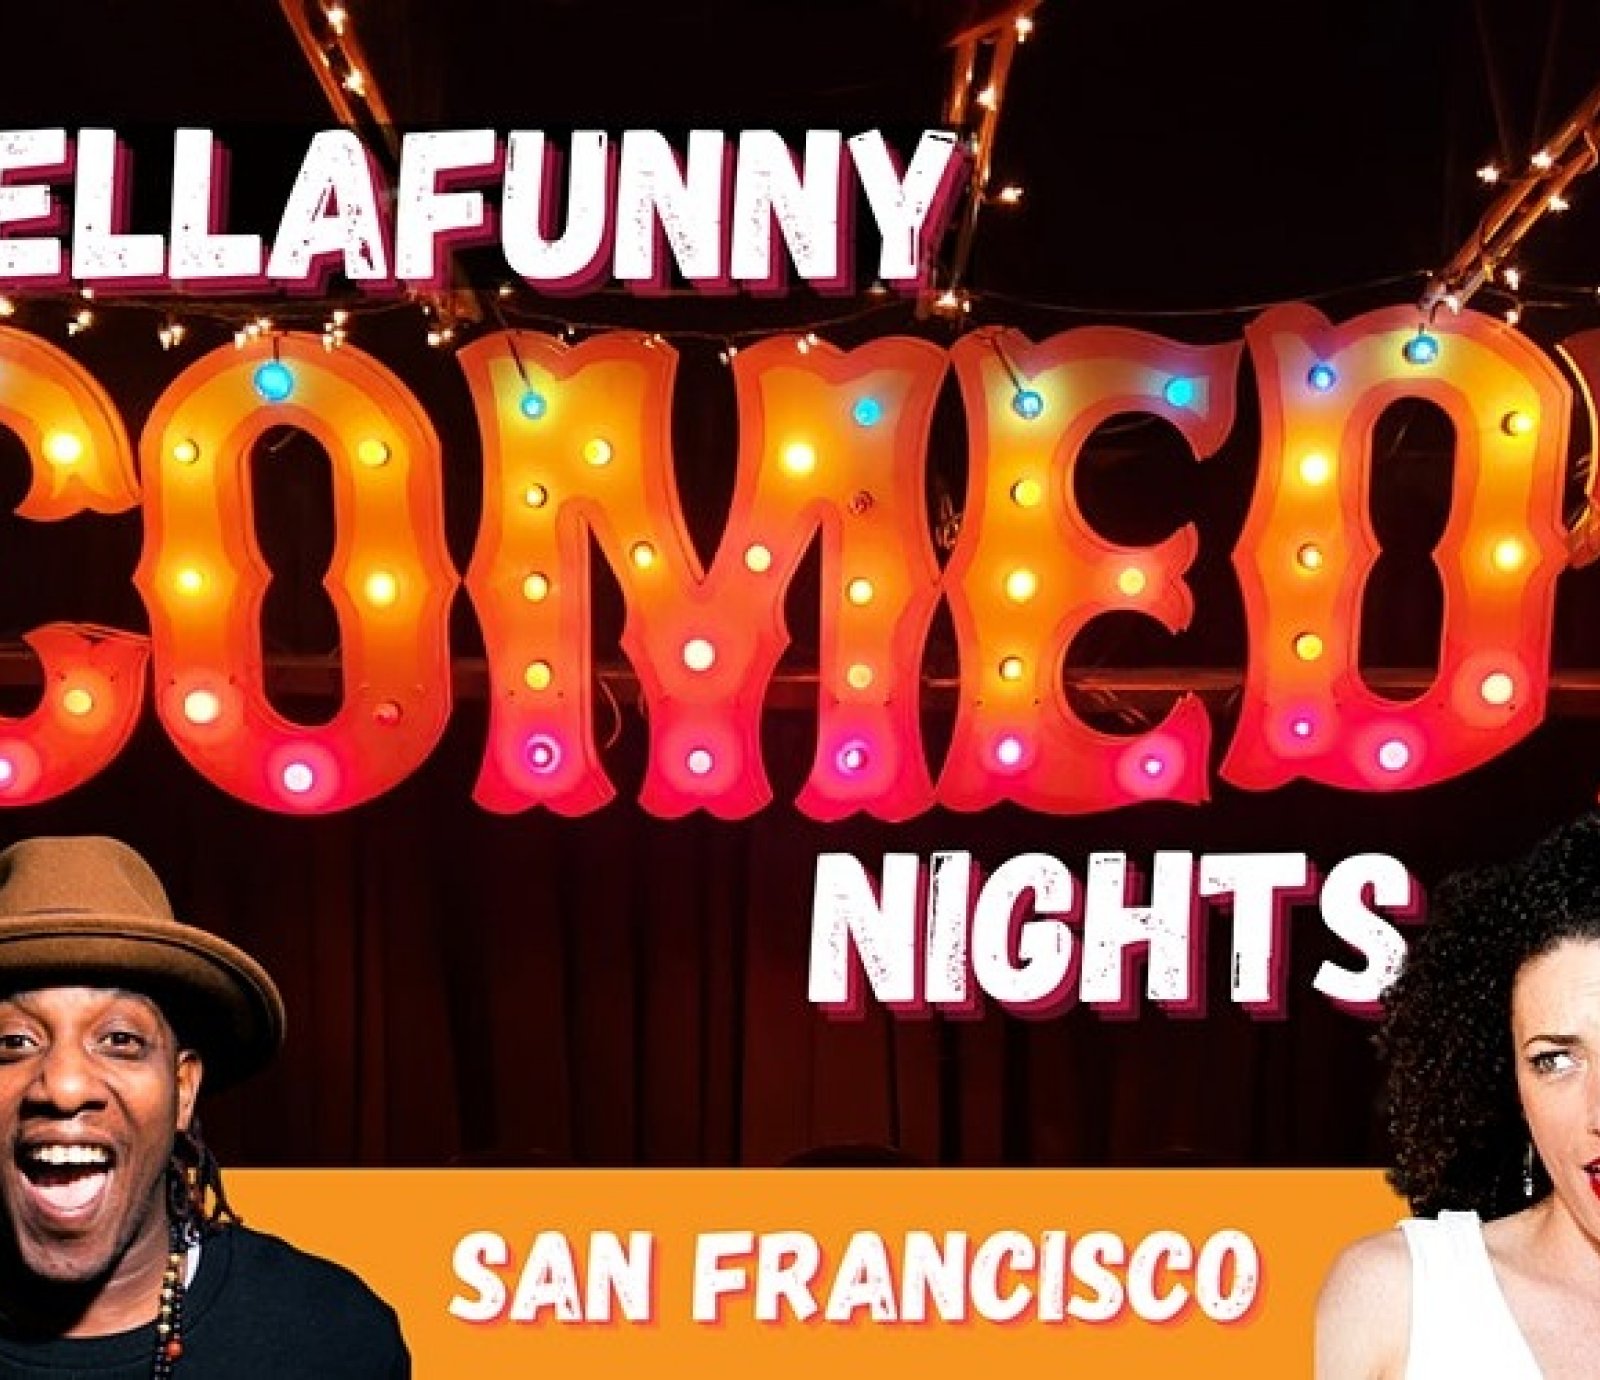 HellaFunny Comedy Nights at SF's Brand New Comedy Club